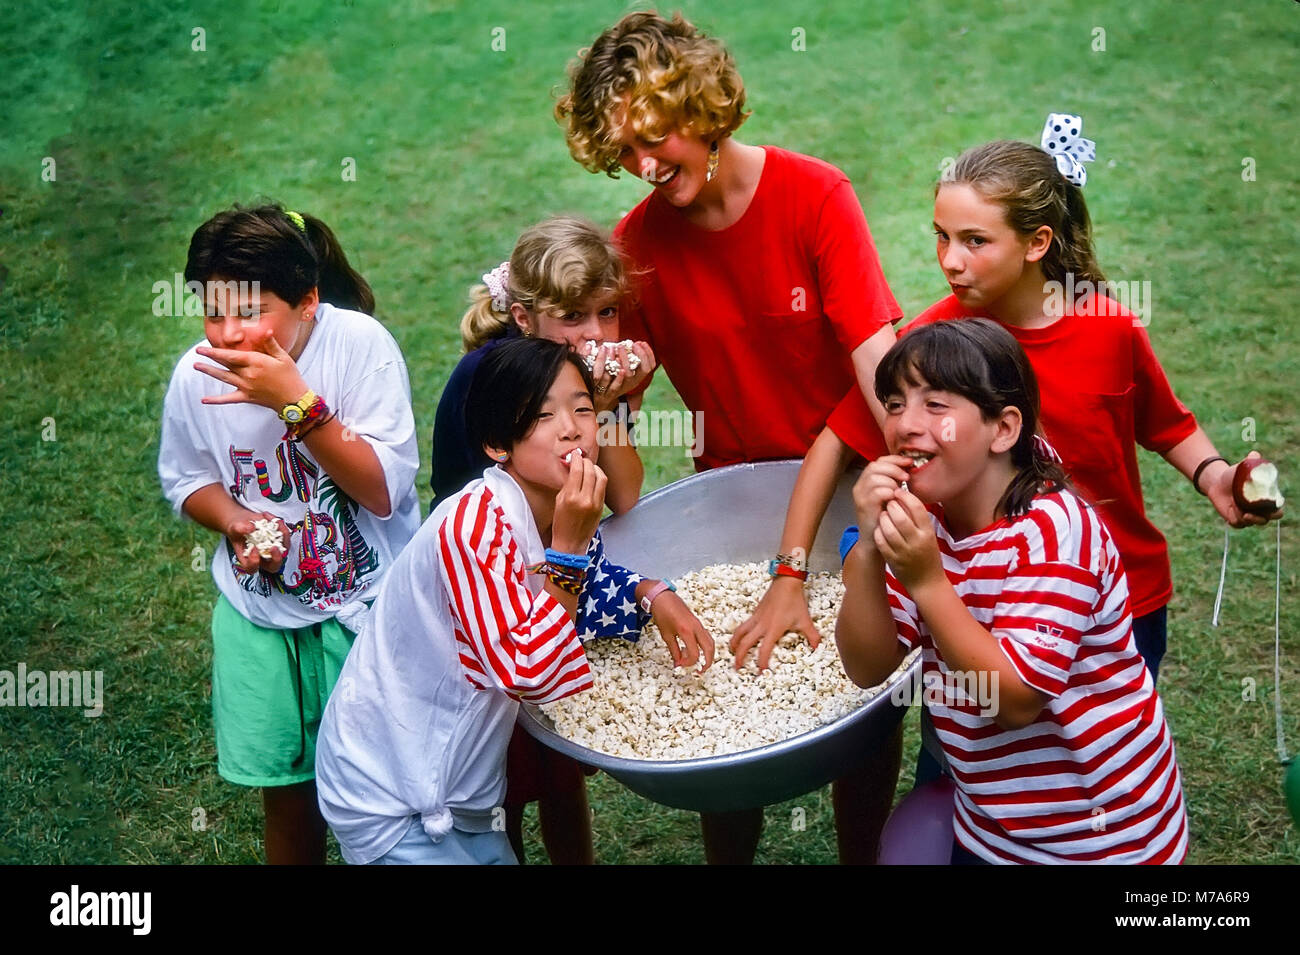 Happy girl children eat popcorn from a large basin with their counselor at a girls summer camp in Vermont, USA Stock Photo